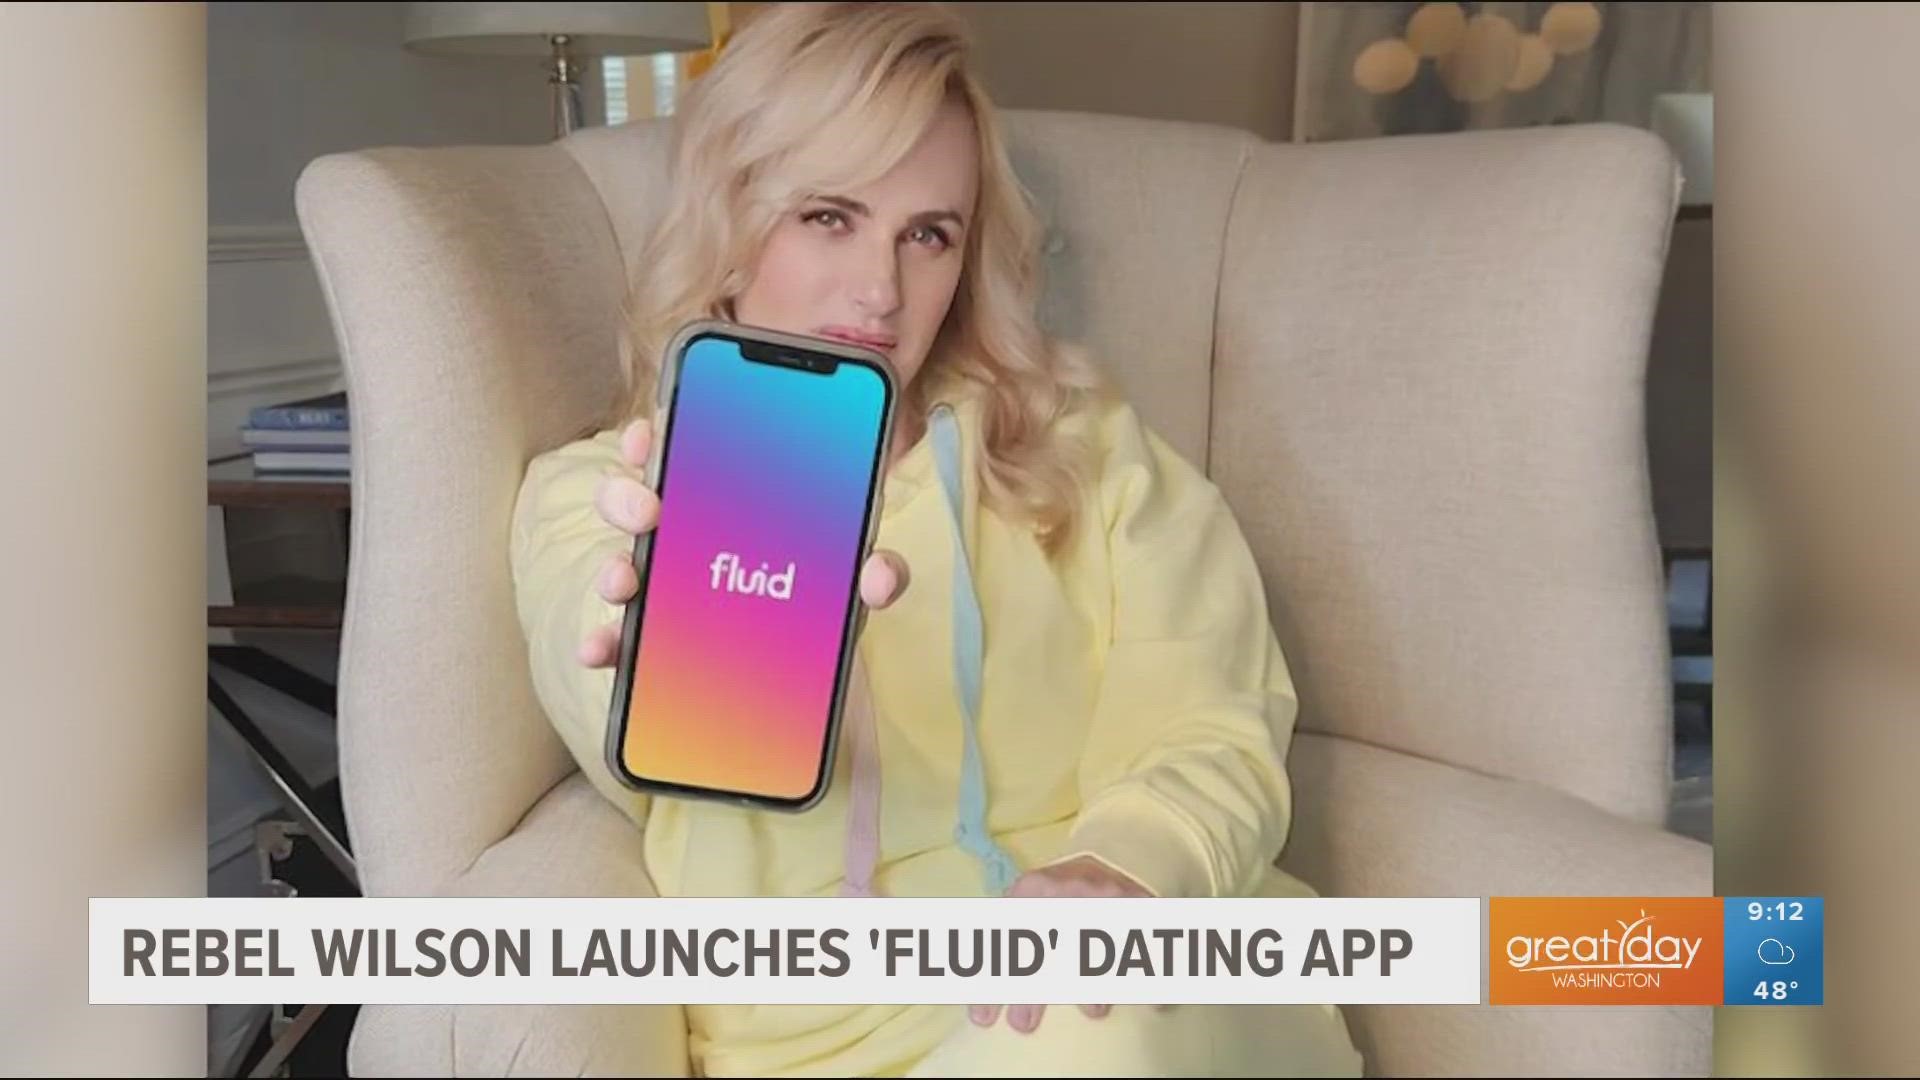 Rebel Wilson launches new 'fluid' dating app, Apple releases teaser for Ted Lasso season 3, Chiefs hold Super Bowl parade, indicator Cherry Blossom tree buds.